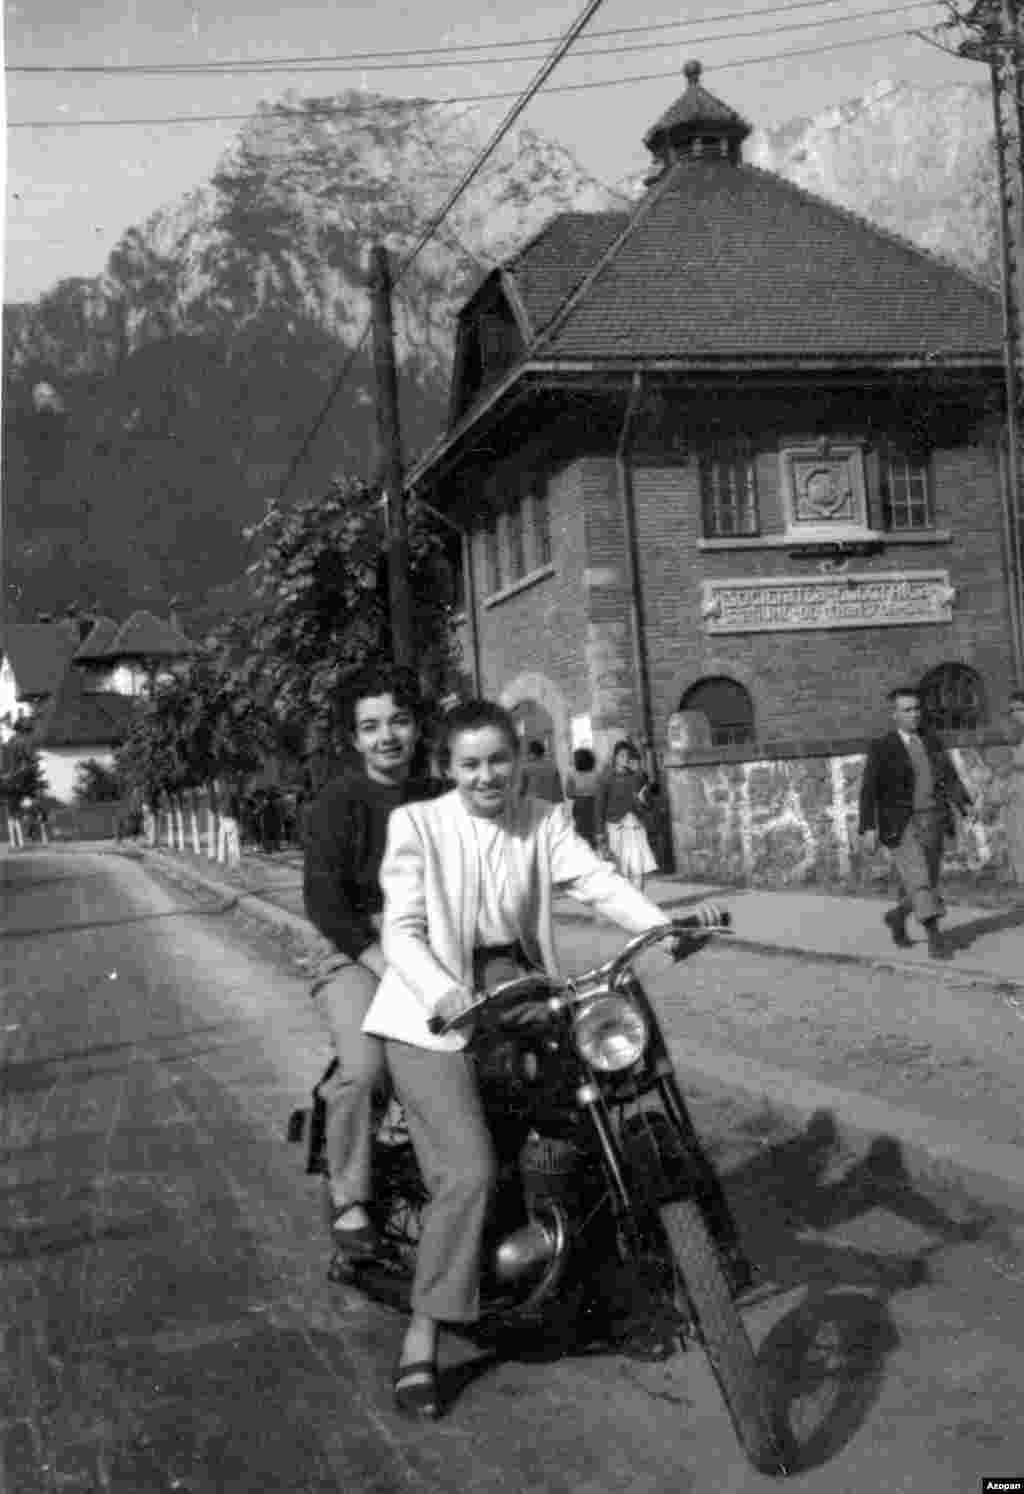 Two young women in Busteni during the 1960s &nbsp; Szocs says Azopan currently has tens of thousands more images in its collection. He says they are not yet published because of the archivists&rsquo; lack of time.